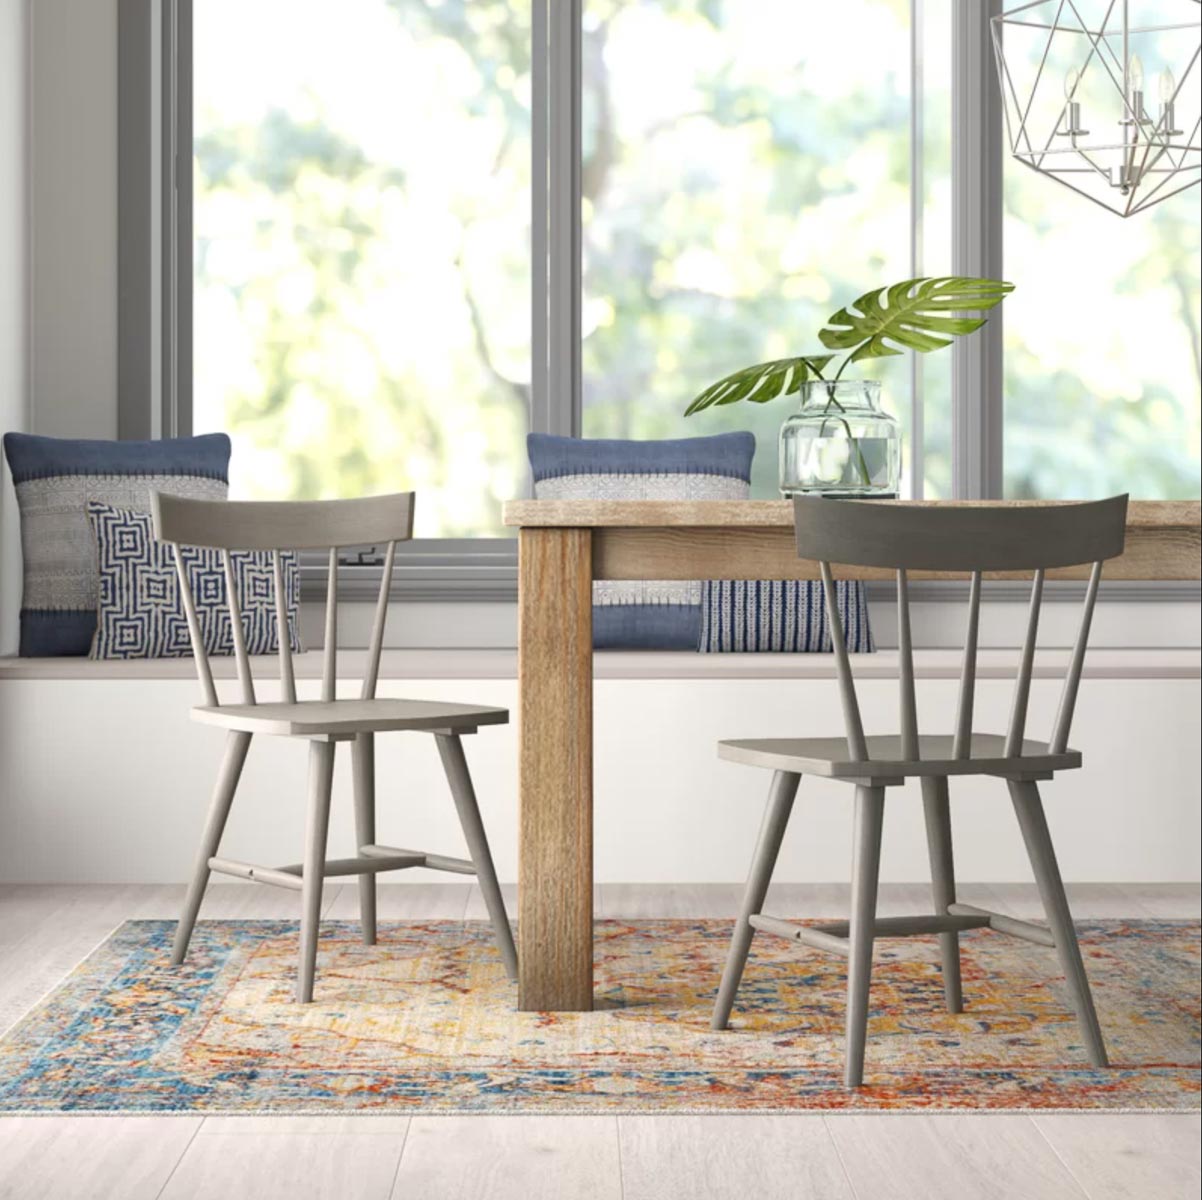 Gray Windsor dining chairs with low backs